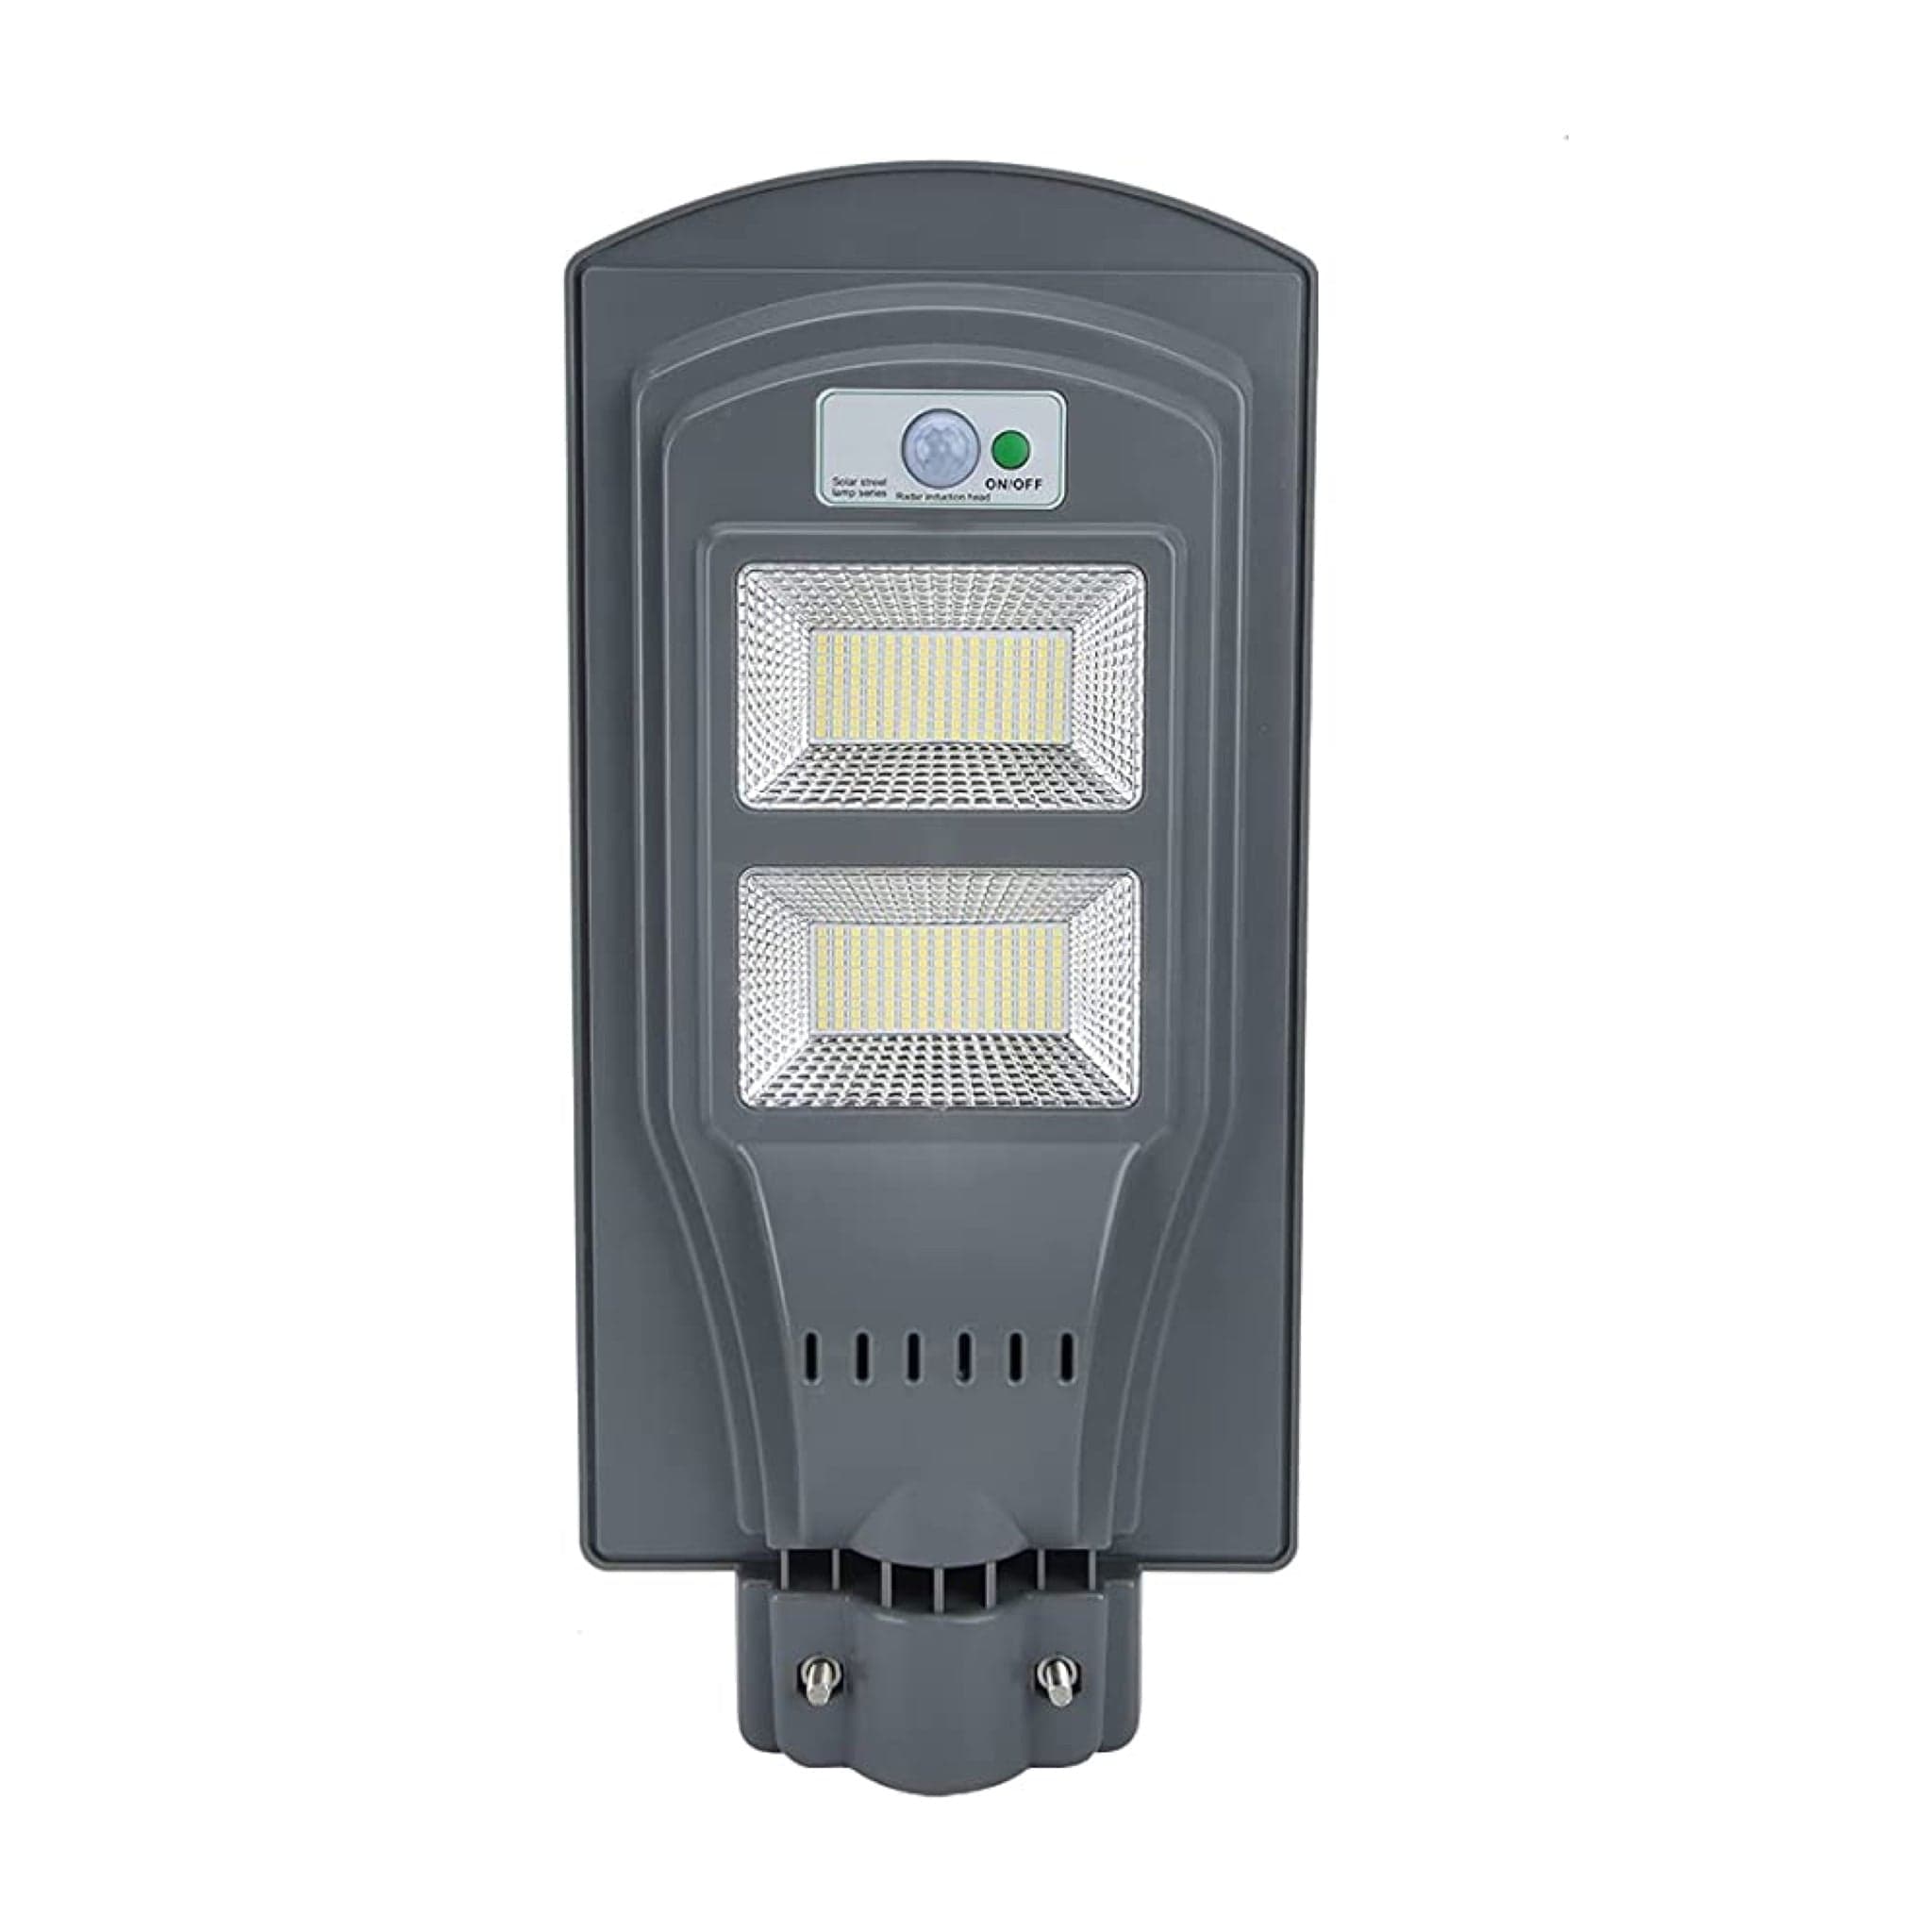 Shop LED Solar Powered Street Light 90W 6500K - JS-A17 | Buy Online at Supply Master Accra, Ghana Lamps & Lightings Buy Tools hardware Building materials